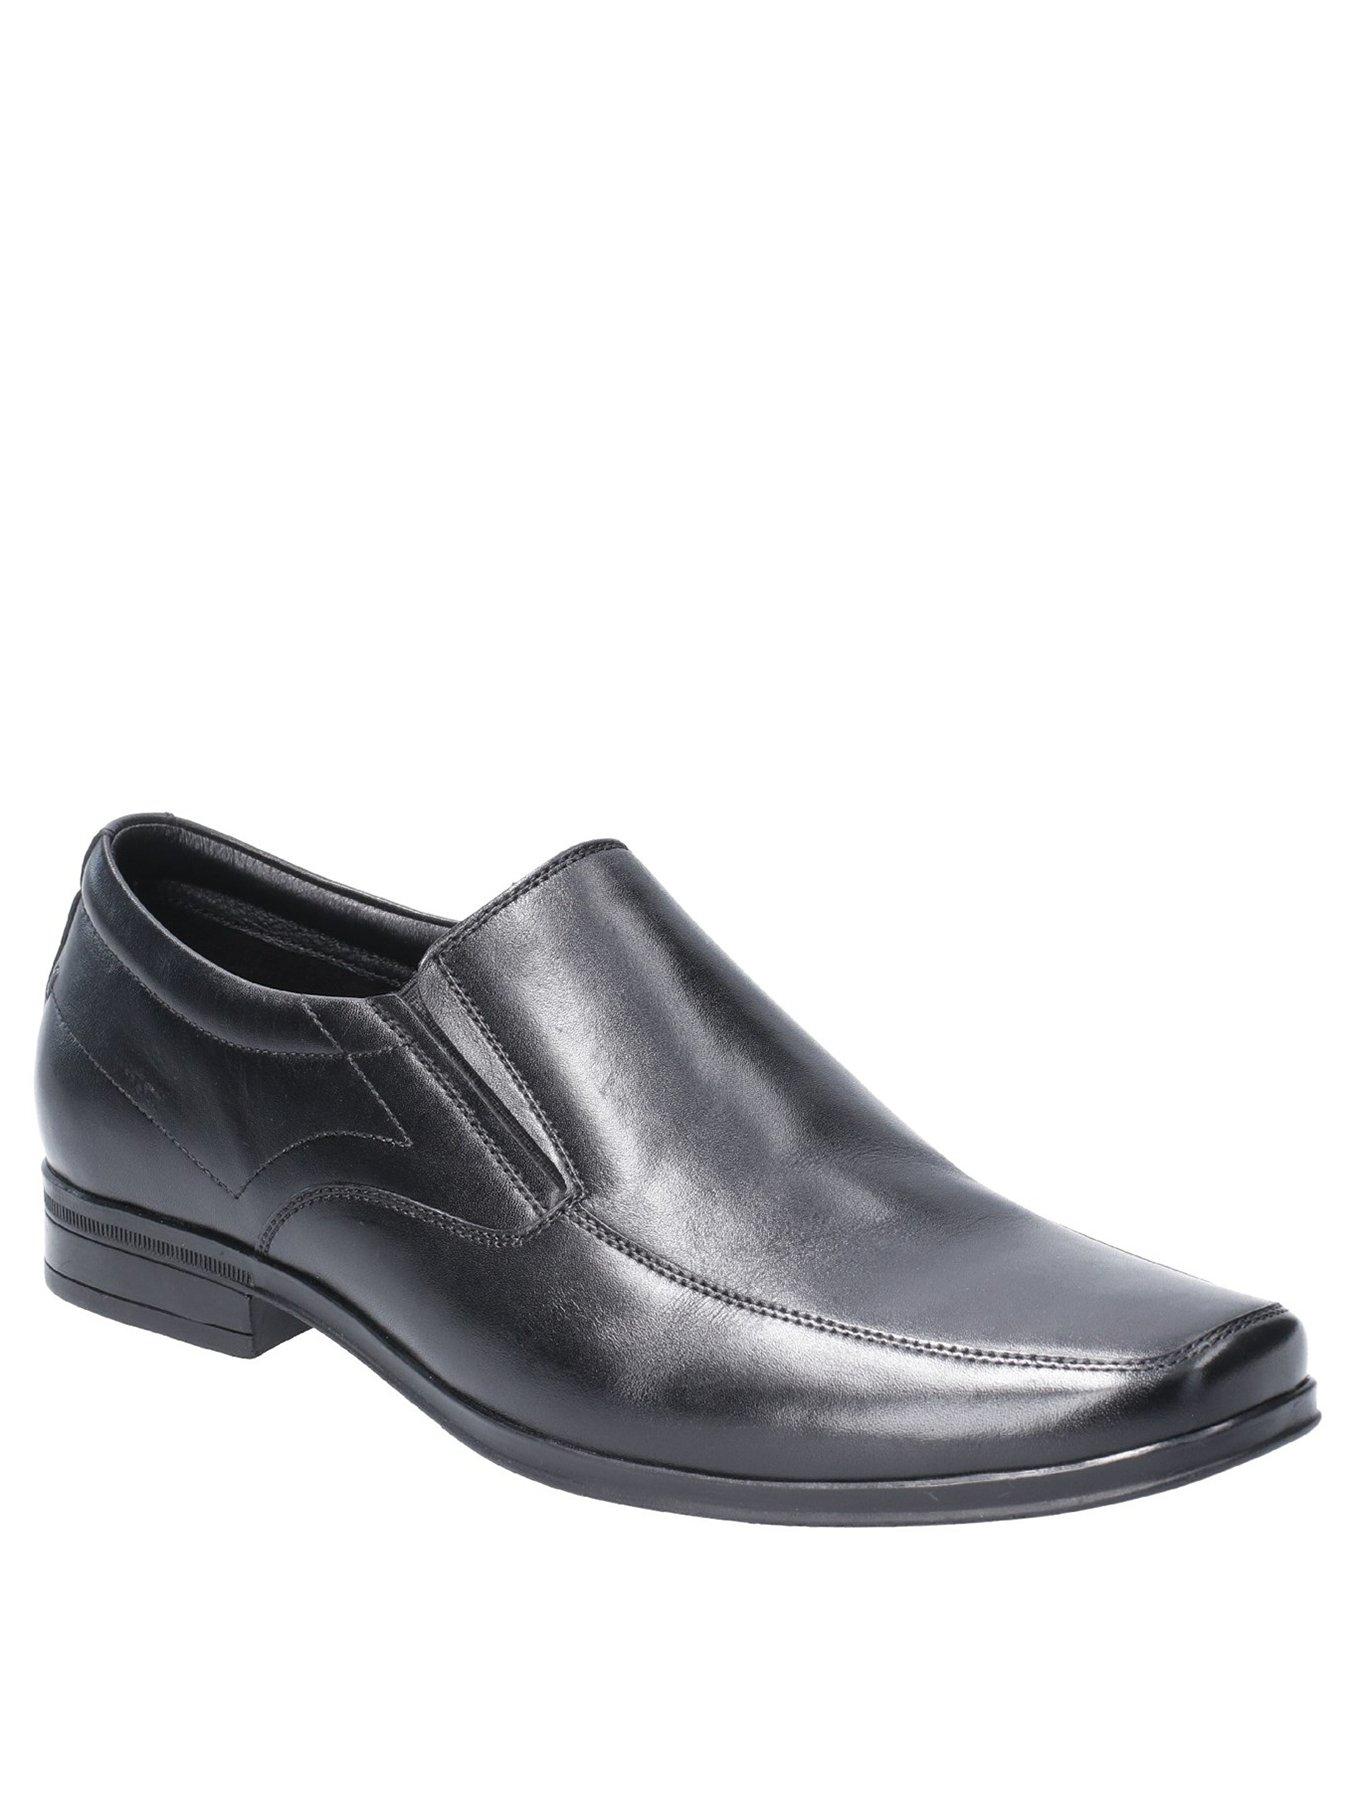 Hush Puppies Billy Slip On Leather Shoes - Black | very.co.uk